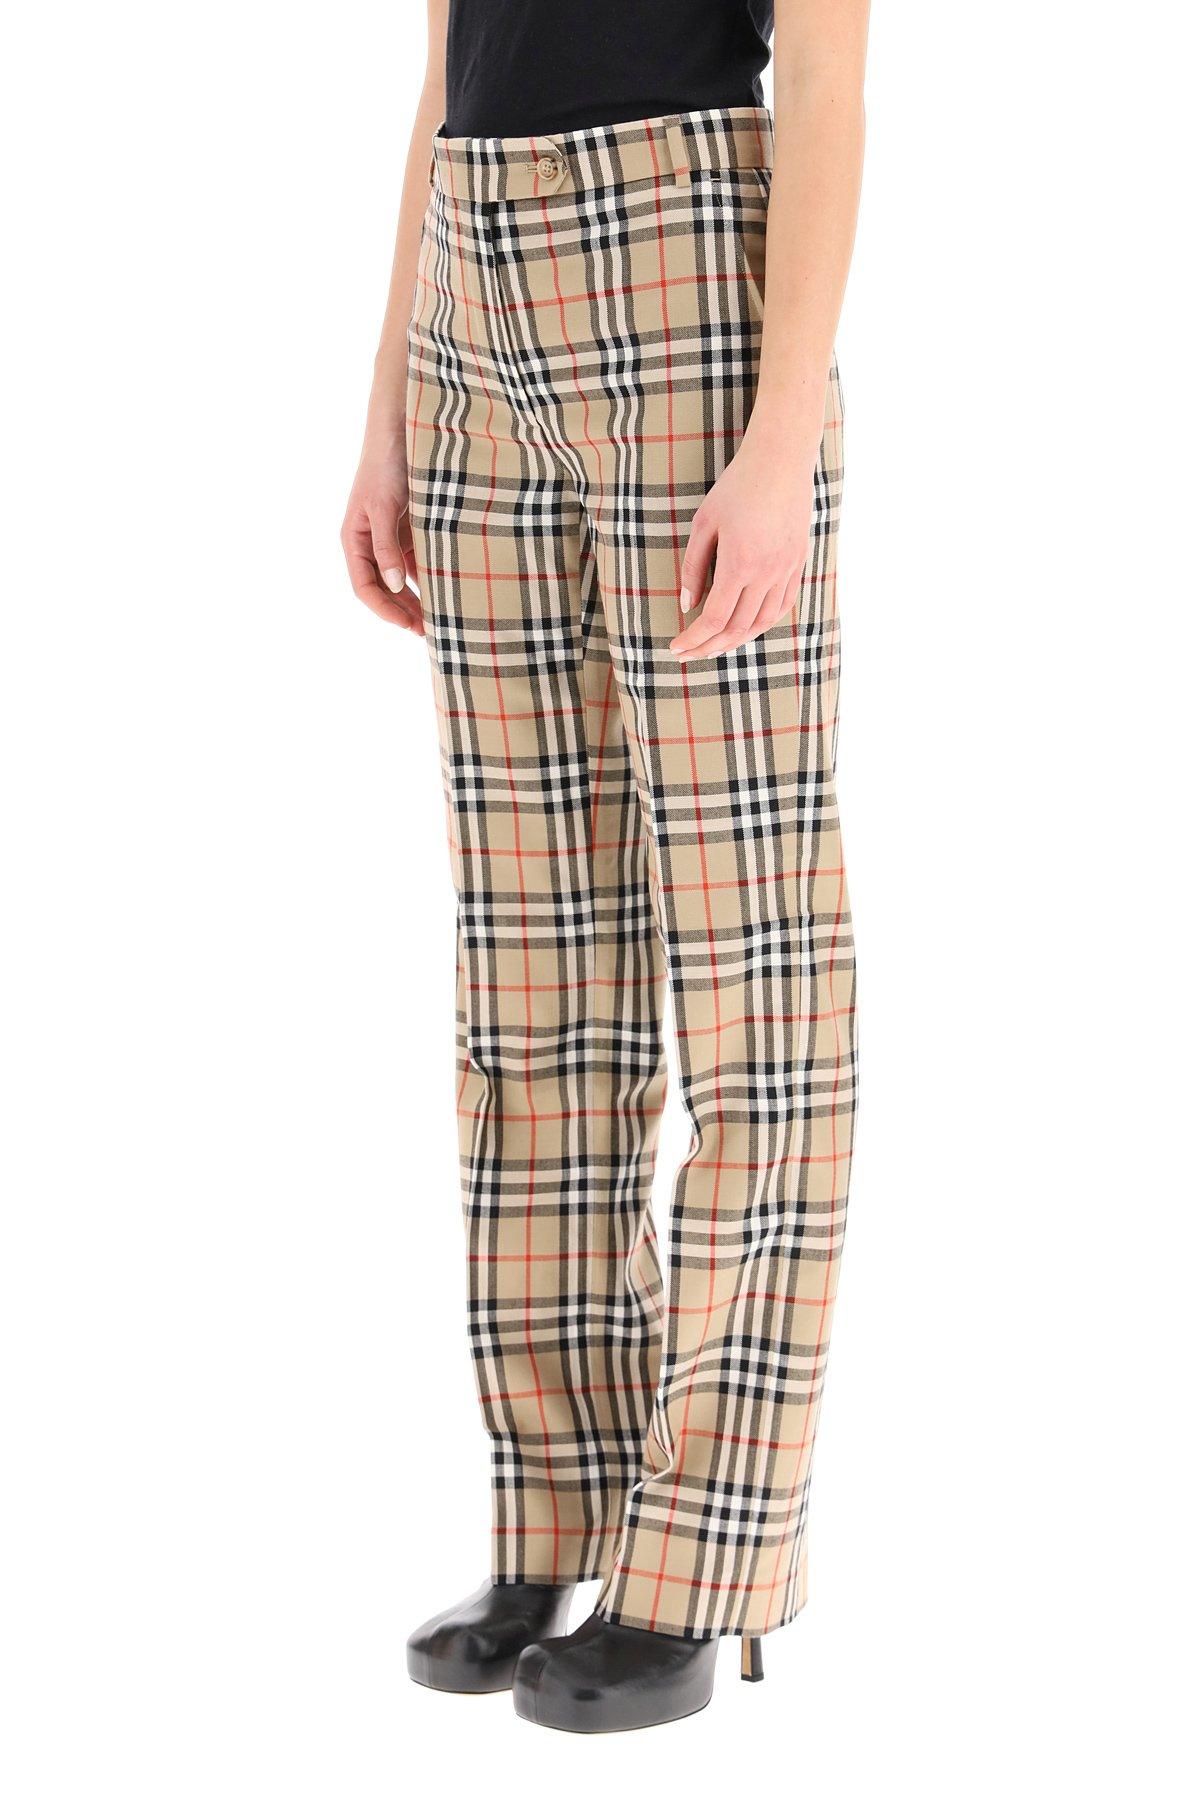 Burberry Wool Fleur Vintage Check Trousers in Natural - Lyst